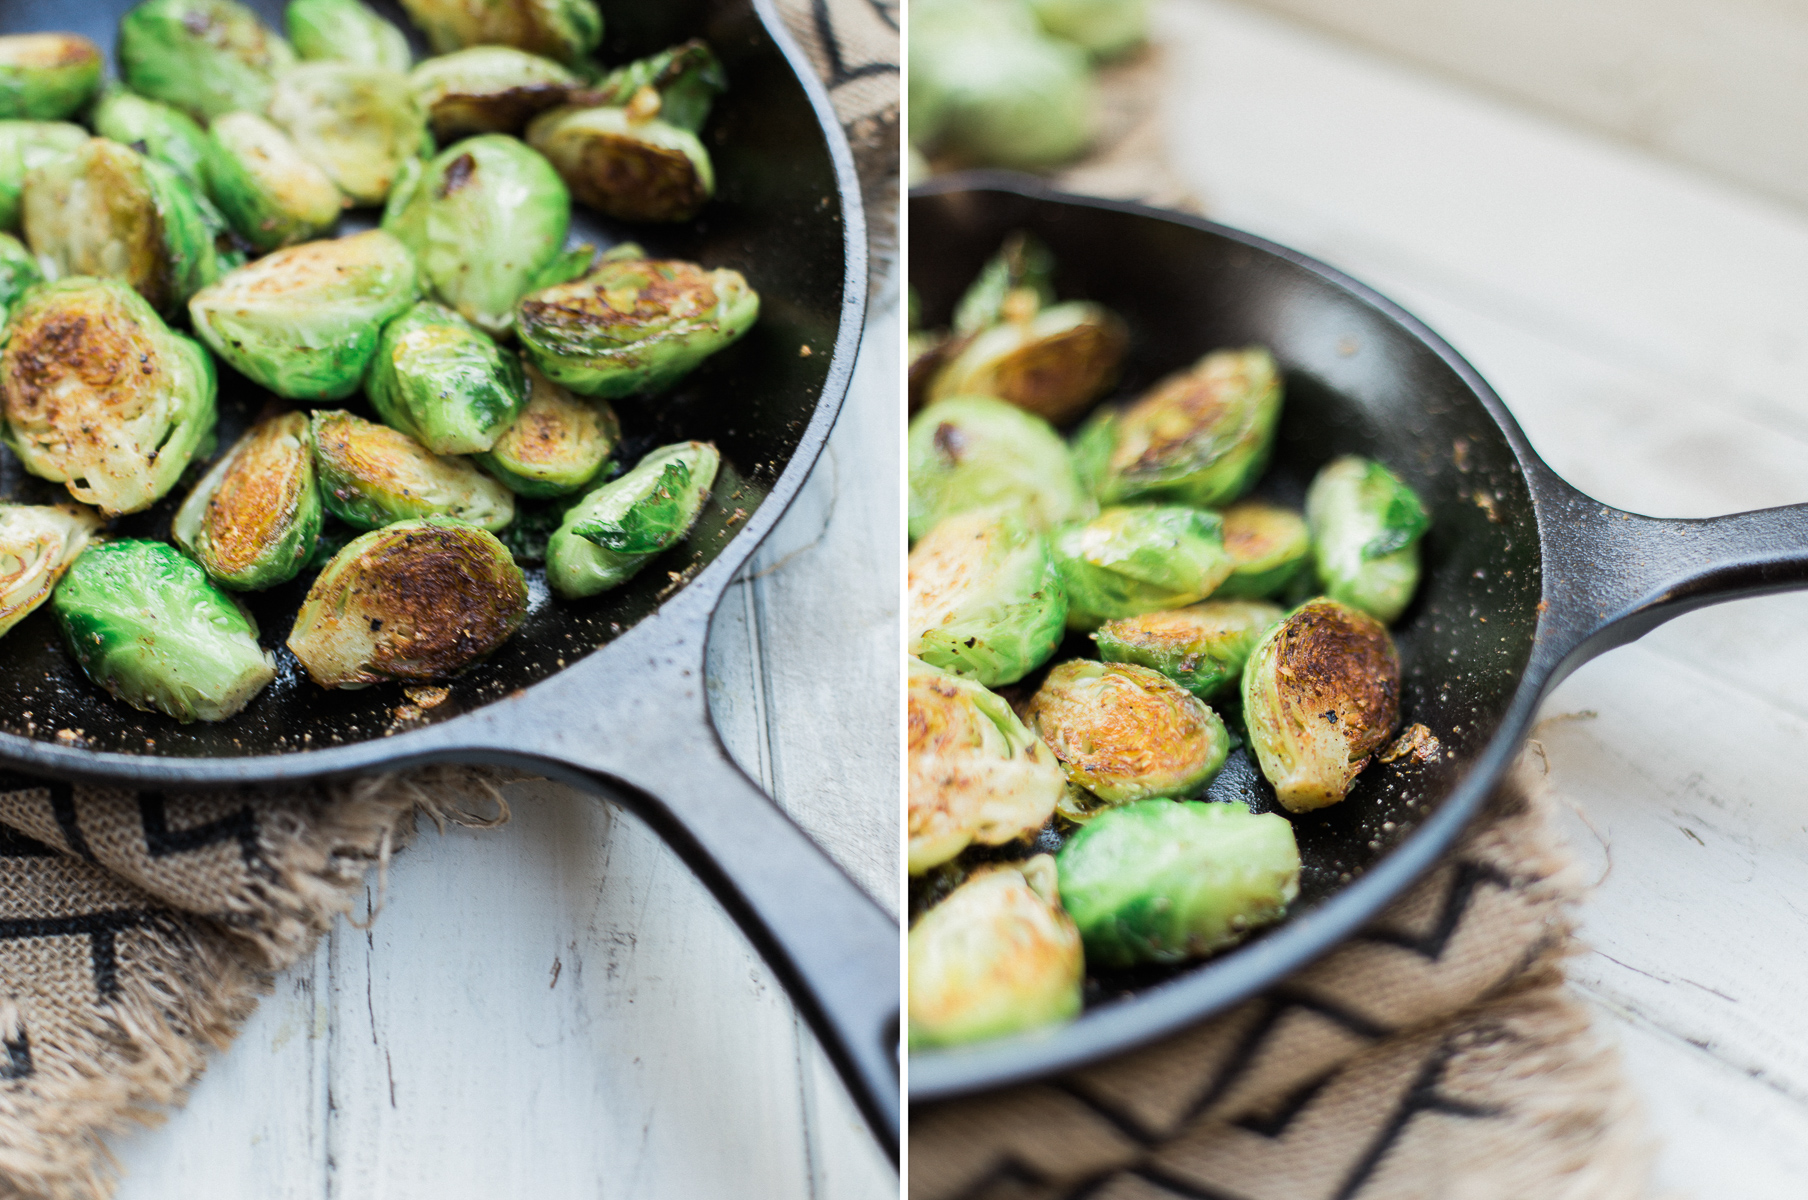 how to cook brussel sprouts on the grill